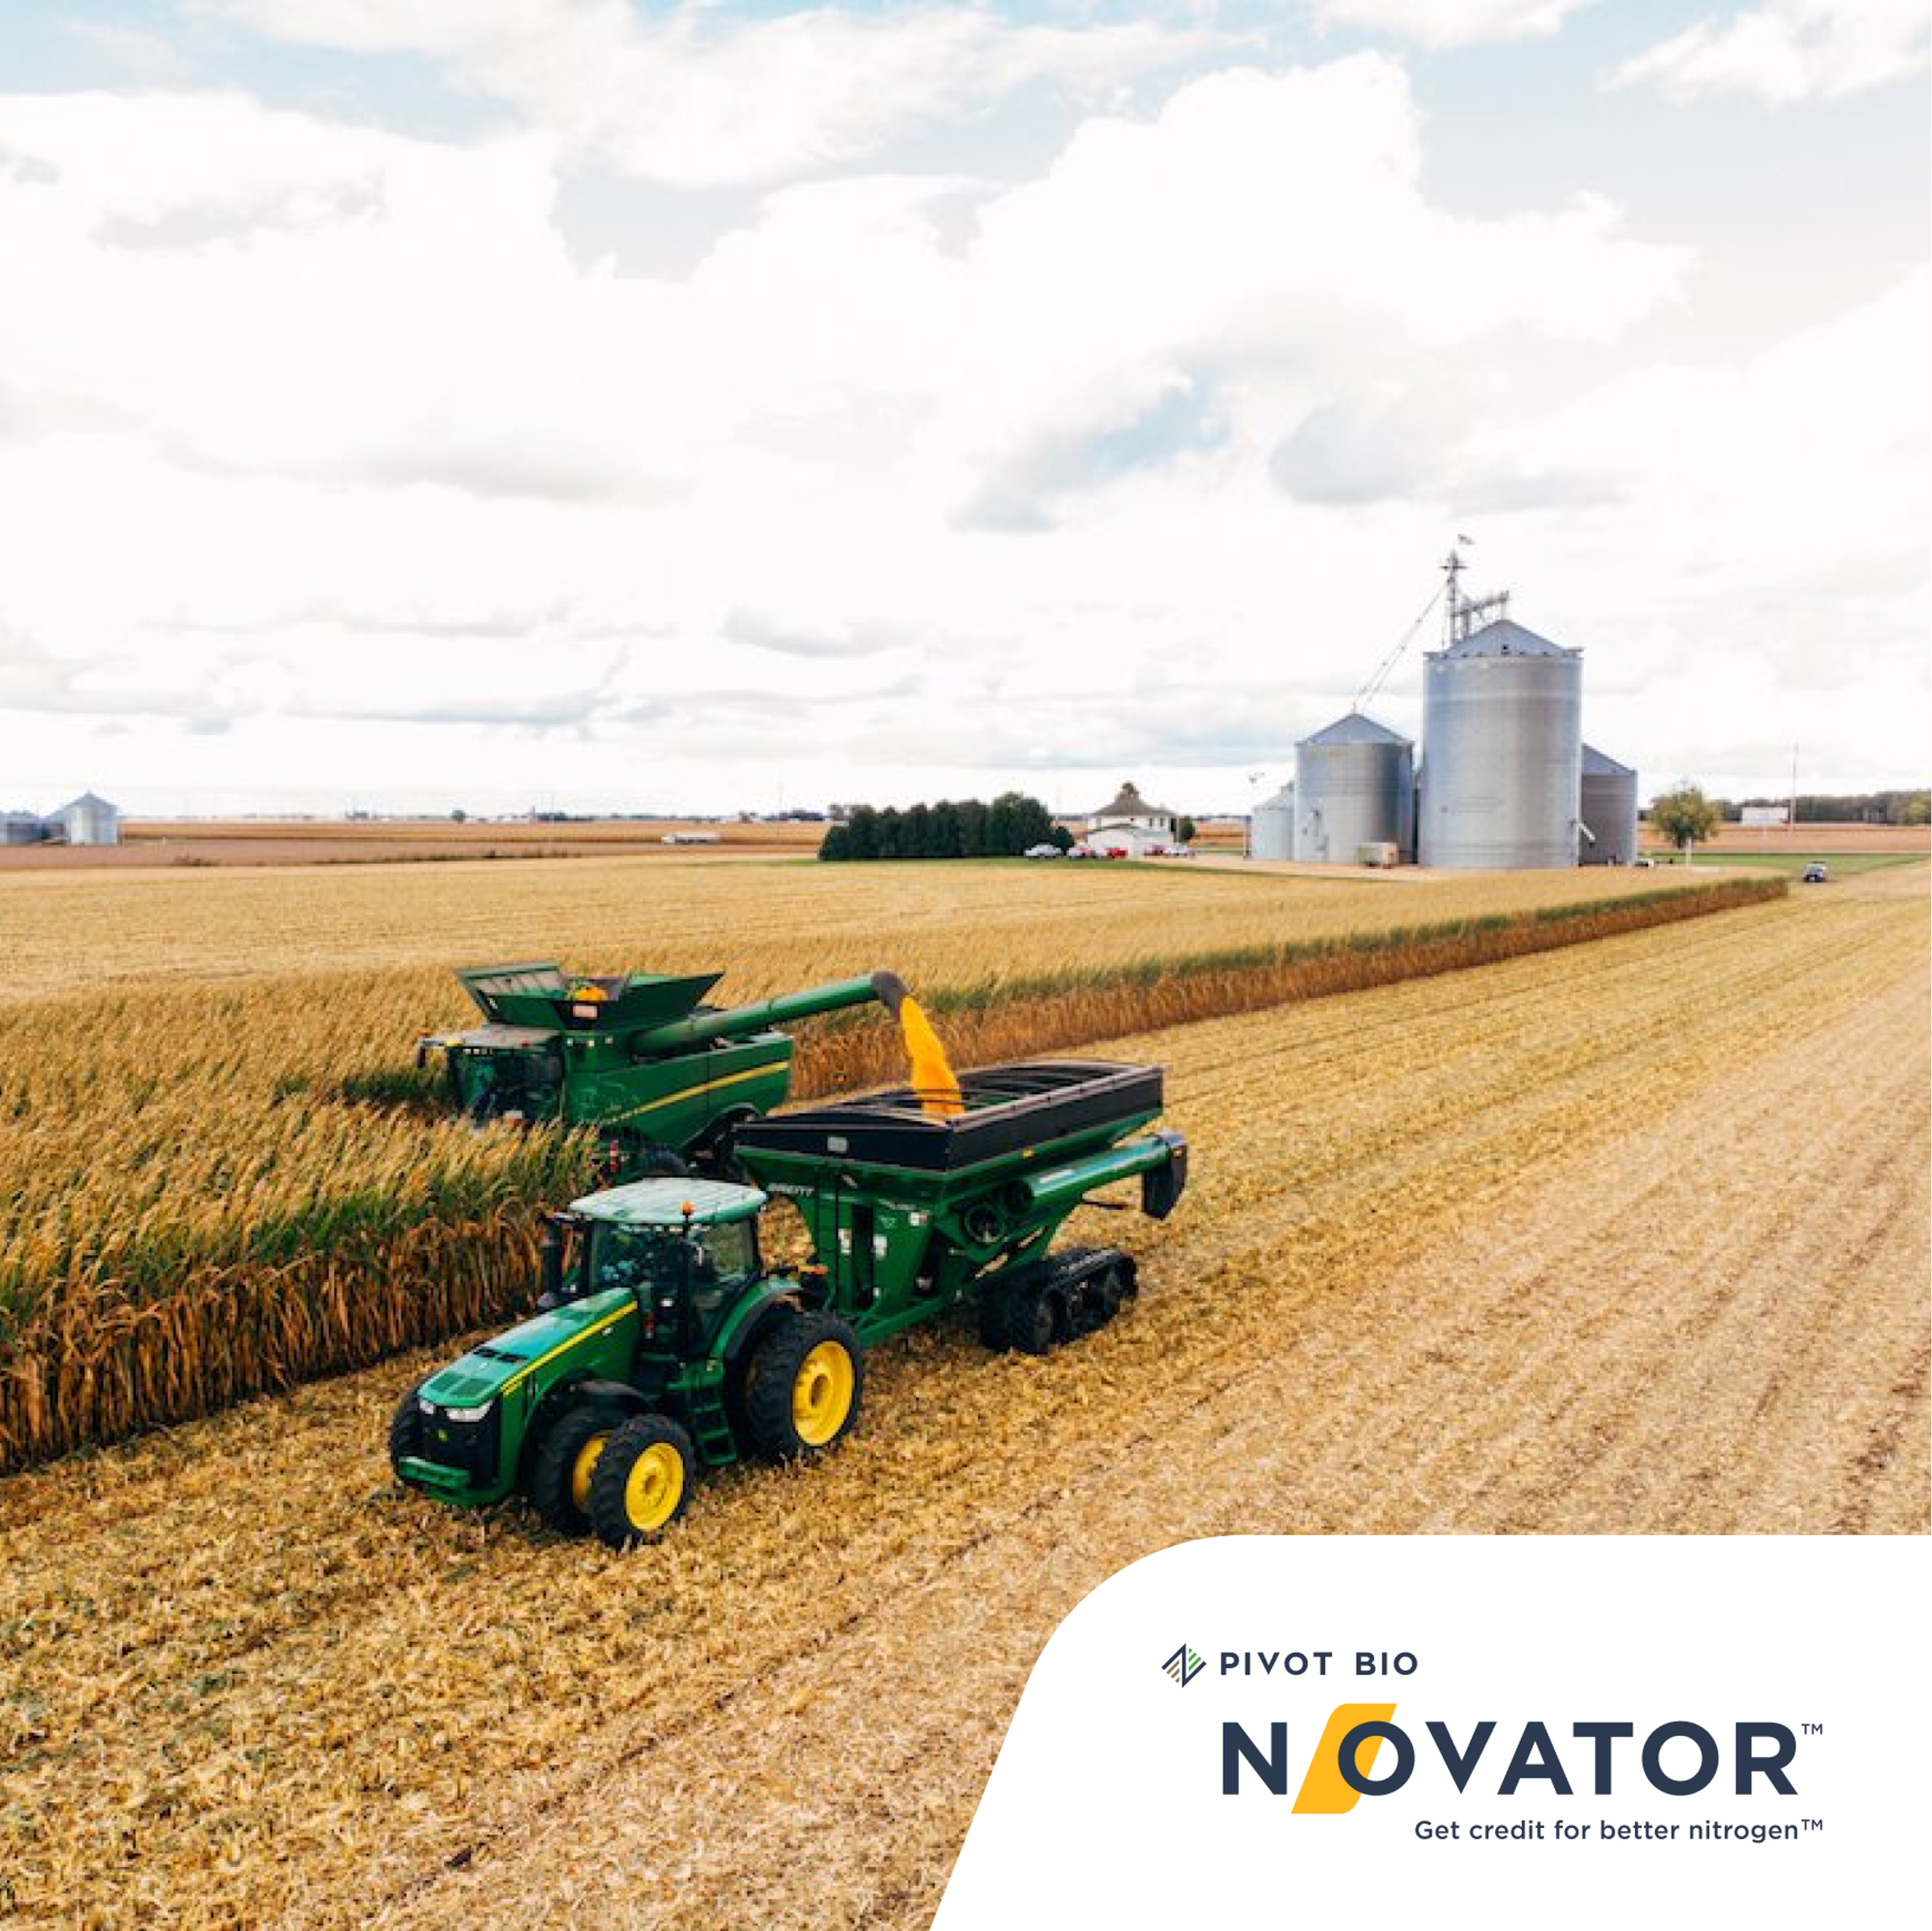 Image of a tractor in a wheat field with the Pivot Bio N-OVATOR logo in the bottom right